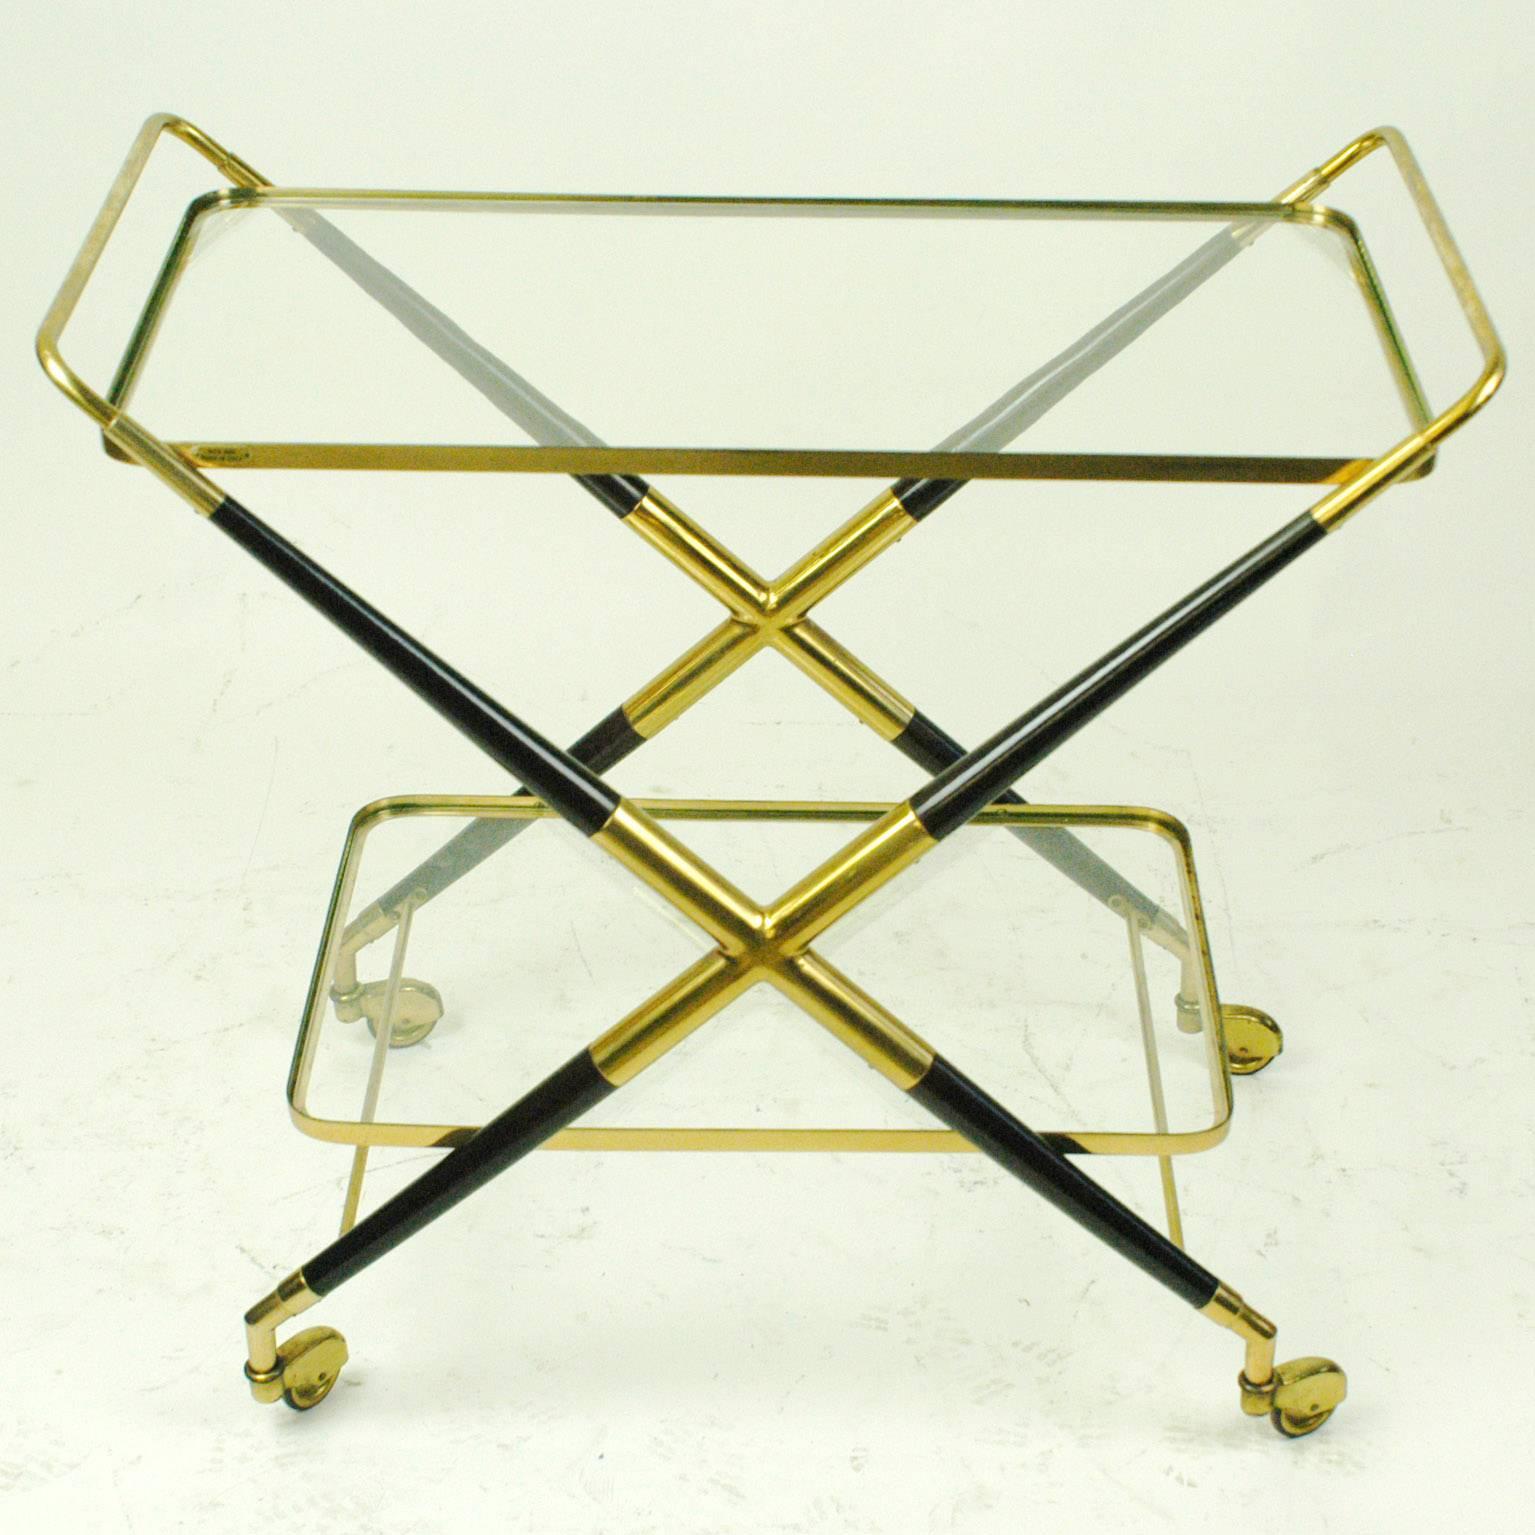 Charming Italian midcentury serving cart designed by Cesare Lacca. Perfect highlight with its clear shape and variety of materials.